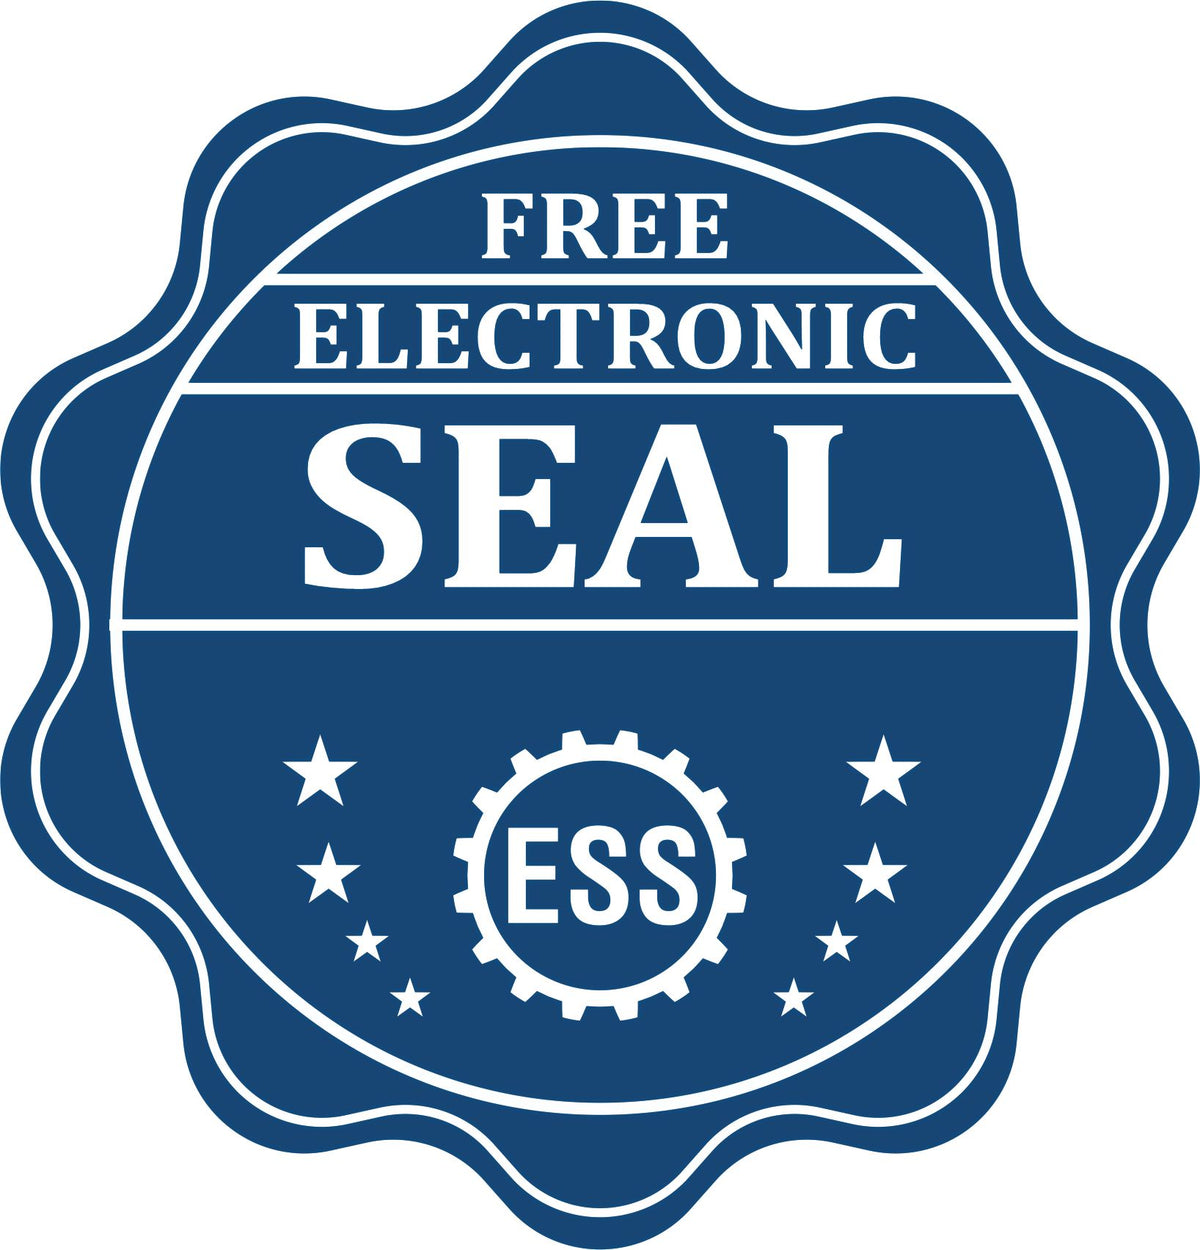 A badge showing a free electronic seal for the Self-Inking Missouri Landscape Architect Stamp with stars and the ESS gear on the emblem.